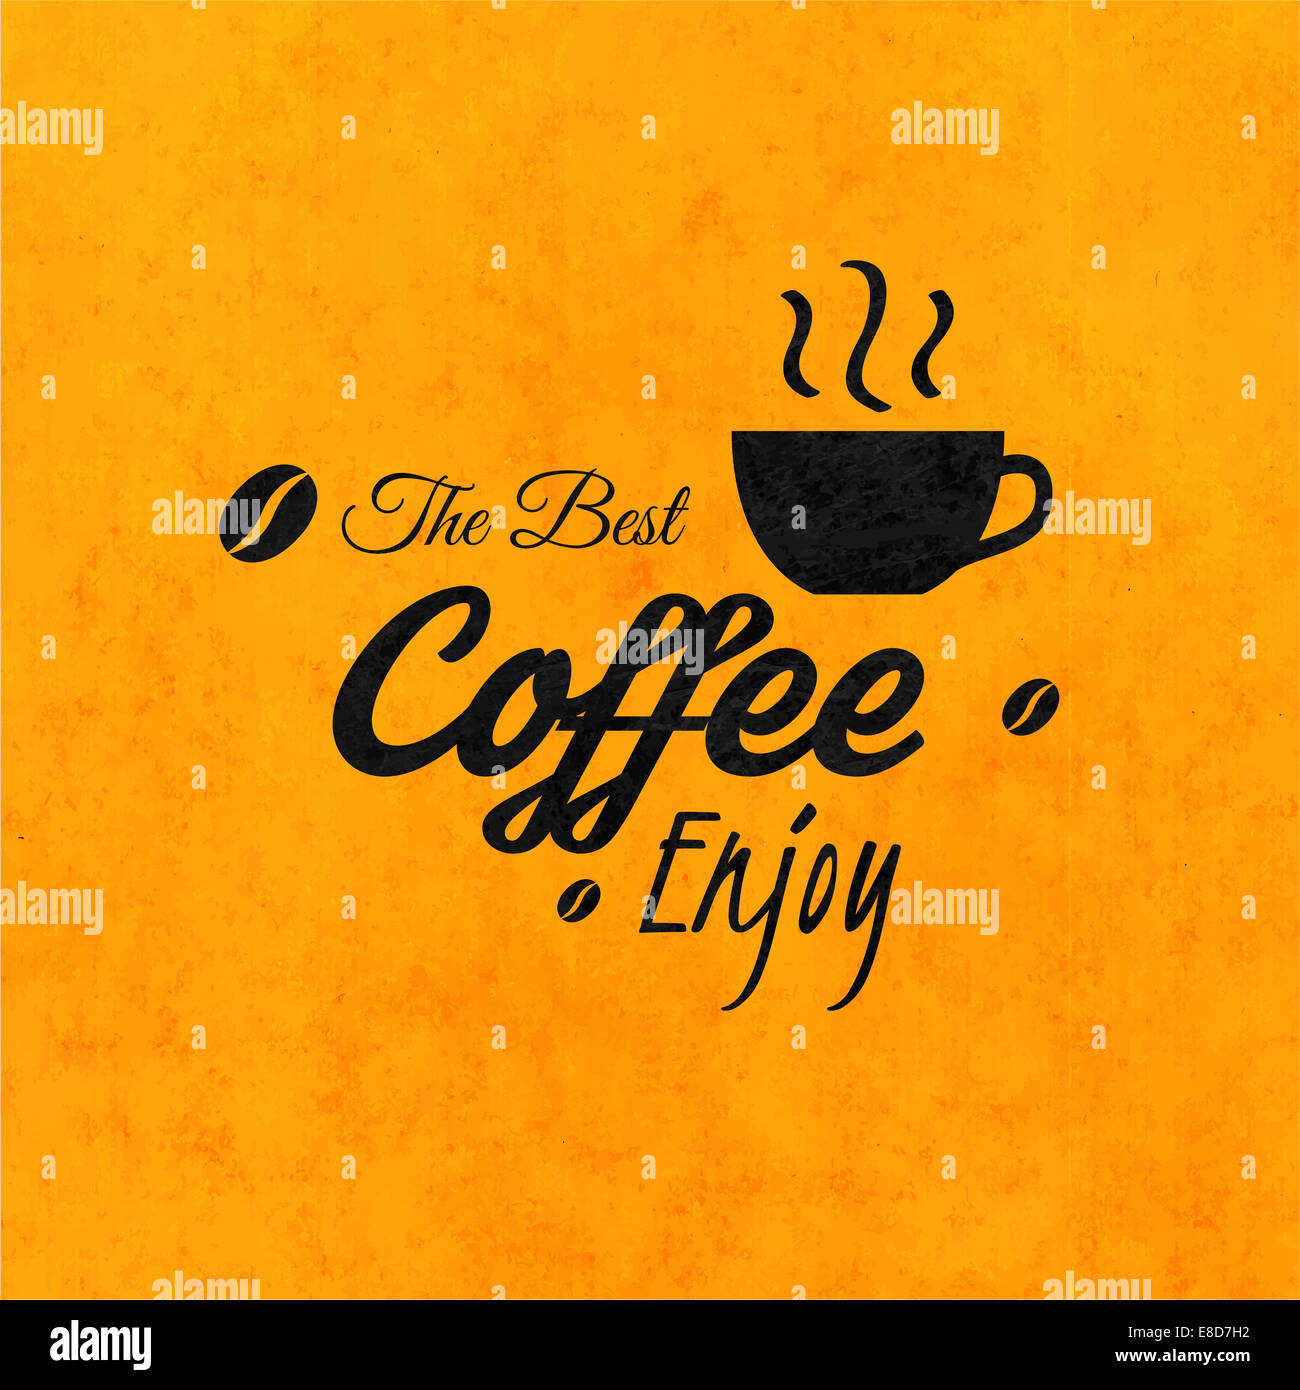 Menu for restaurant, the best coffee enjoy, use for cafe, bar of coffeehouse Stock Photo